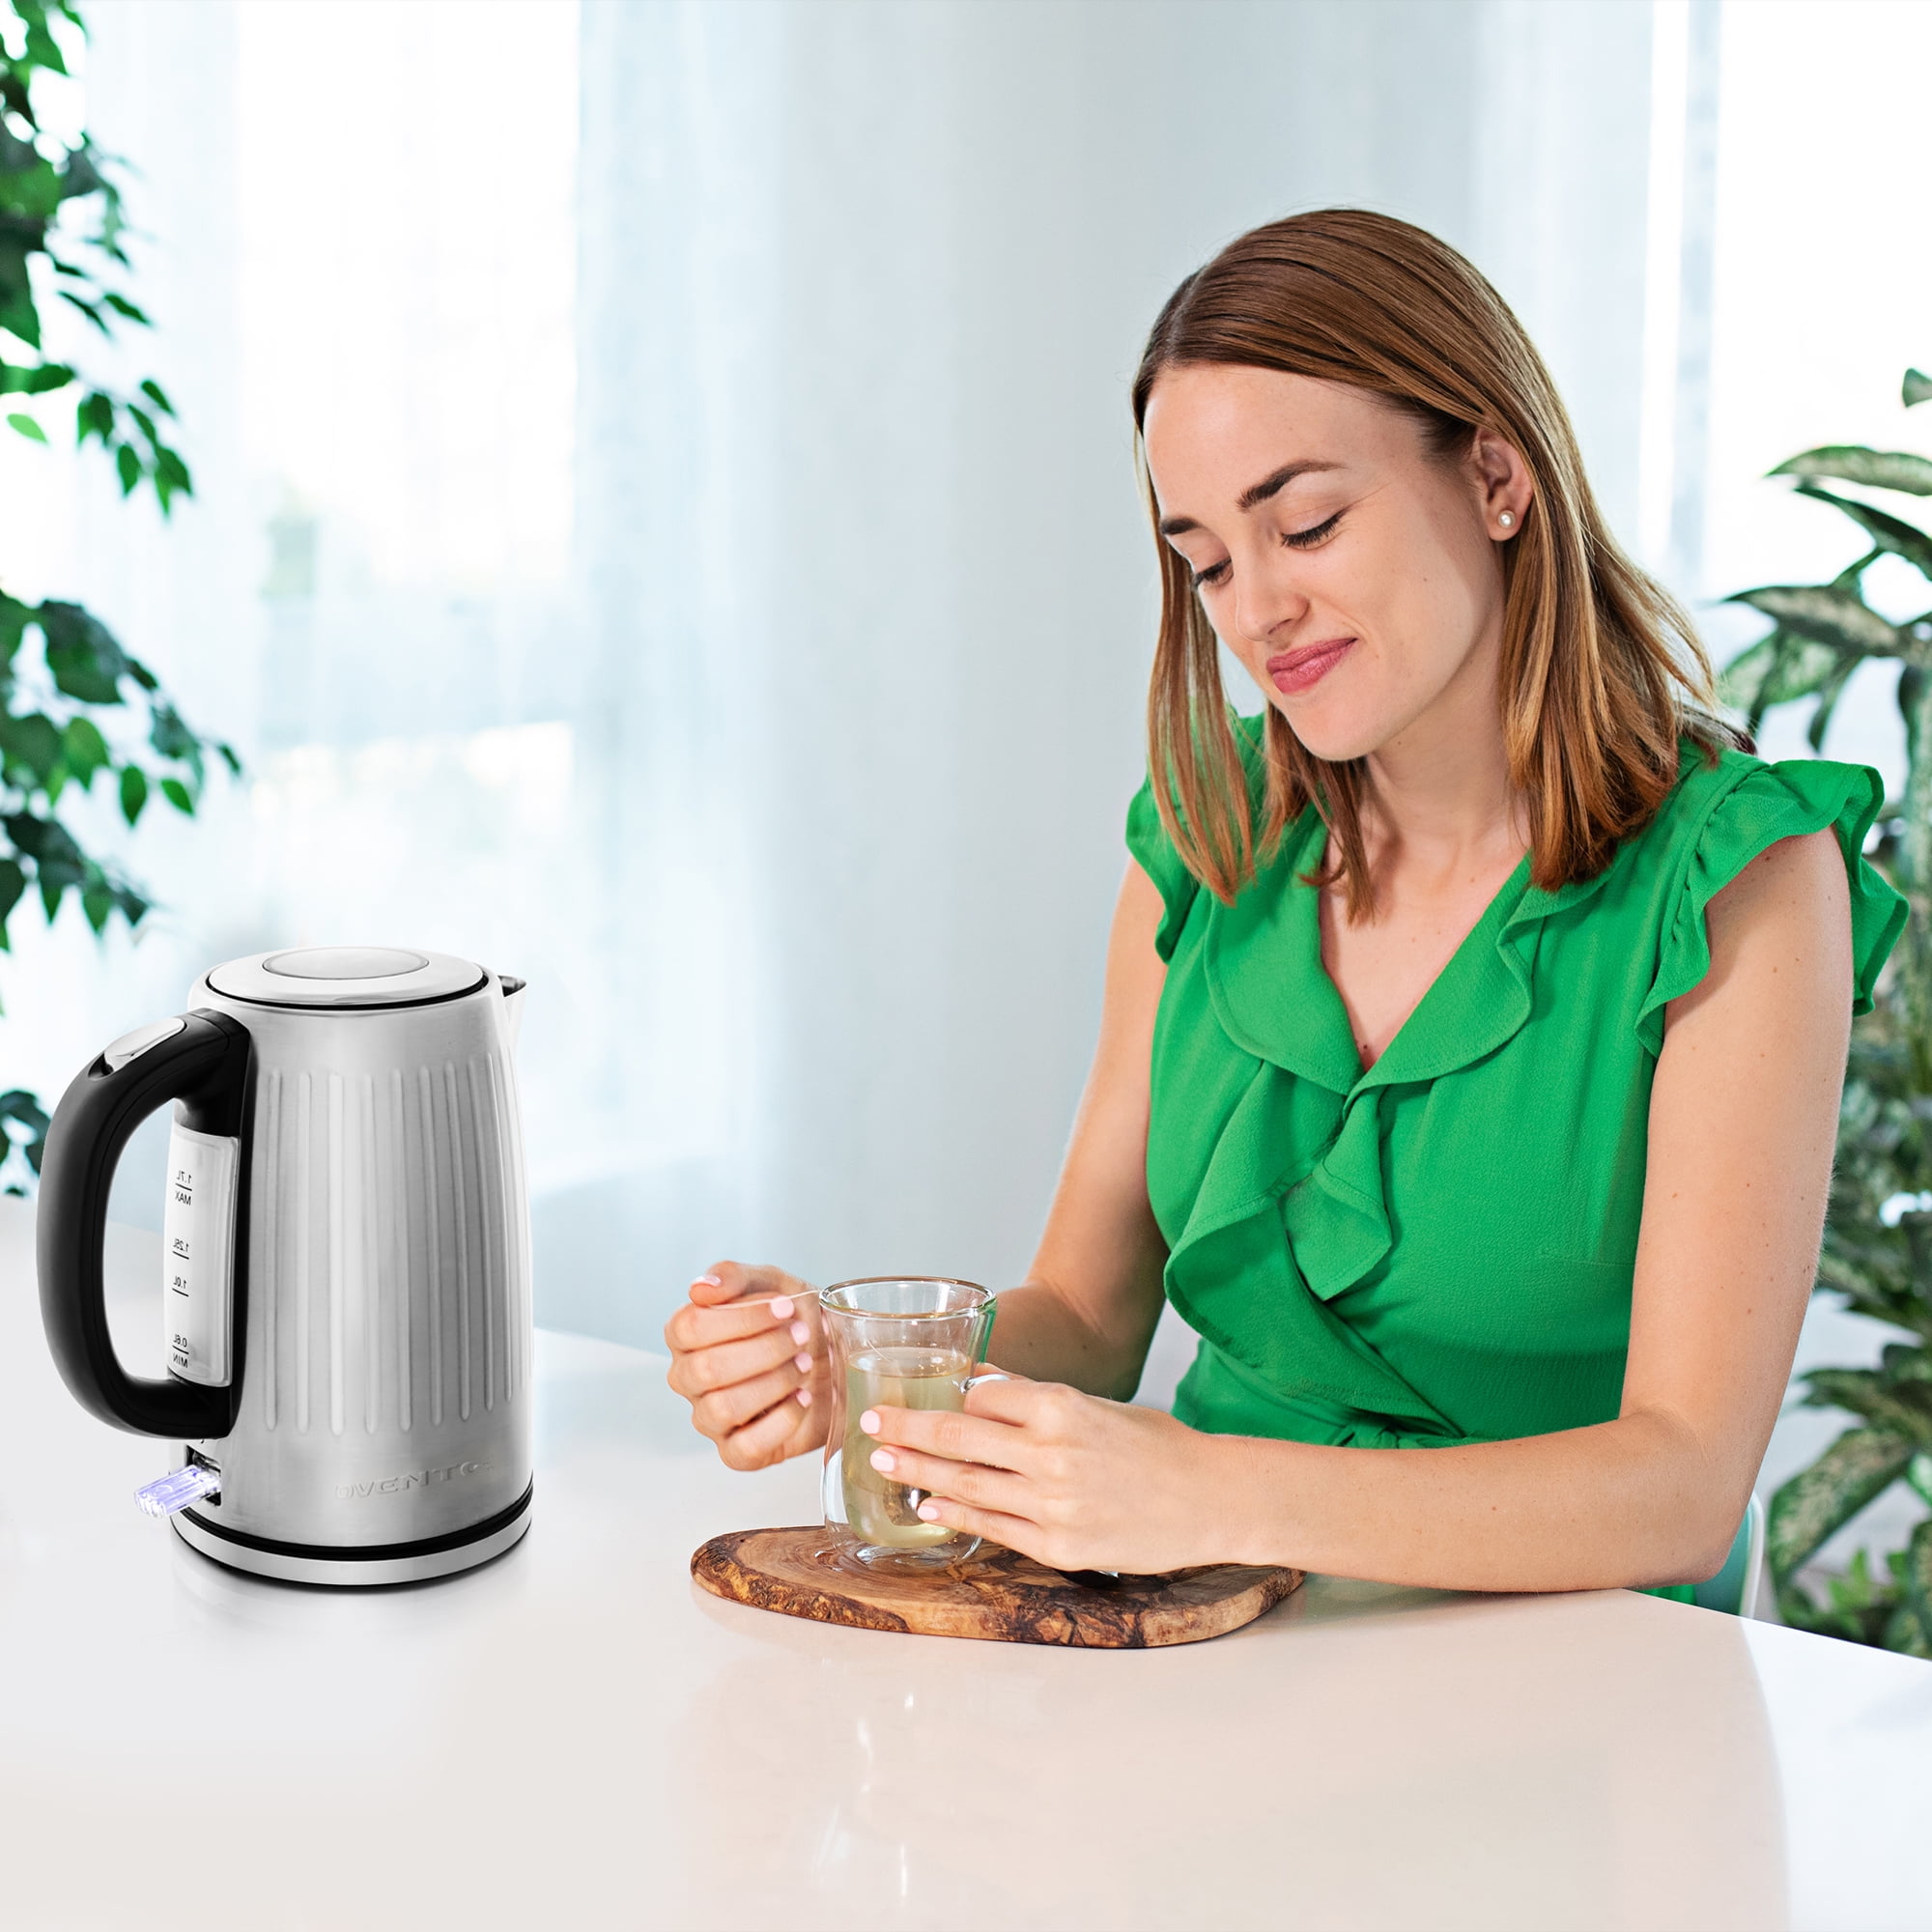 OVENTE Stainless Steel Electric Kettle Hot Water Boiler 1.7 Liters -  Powerful 1750W BPA Free with Auto Shut Off & Boil Dry Protection, Portable